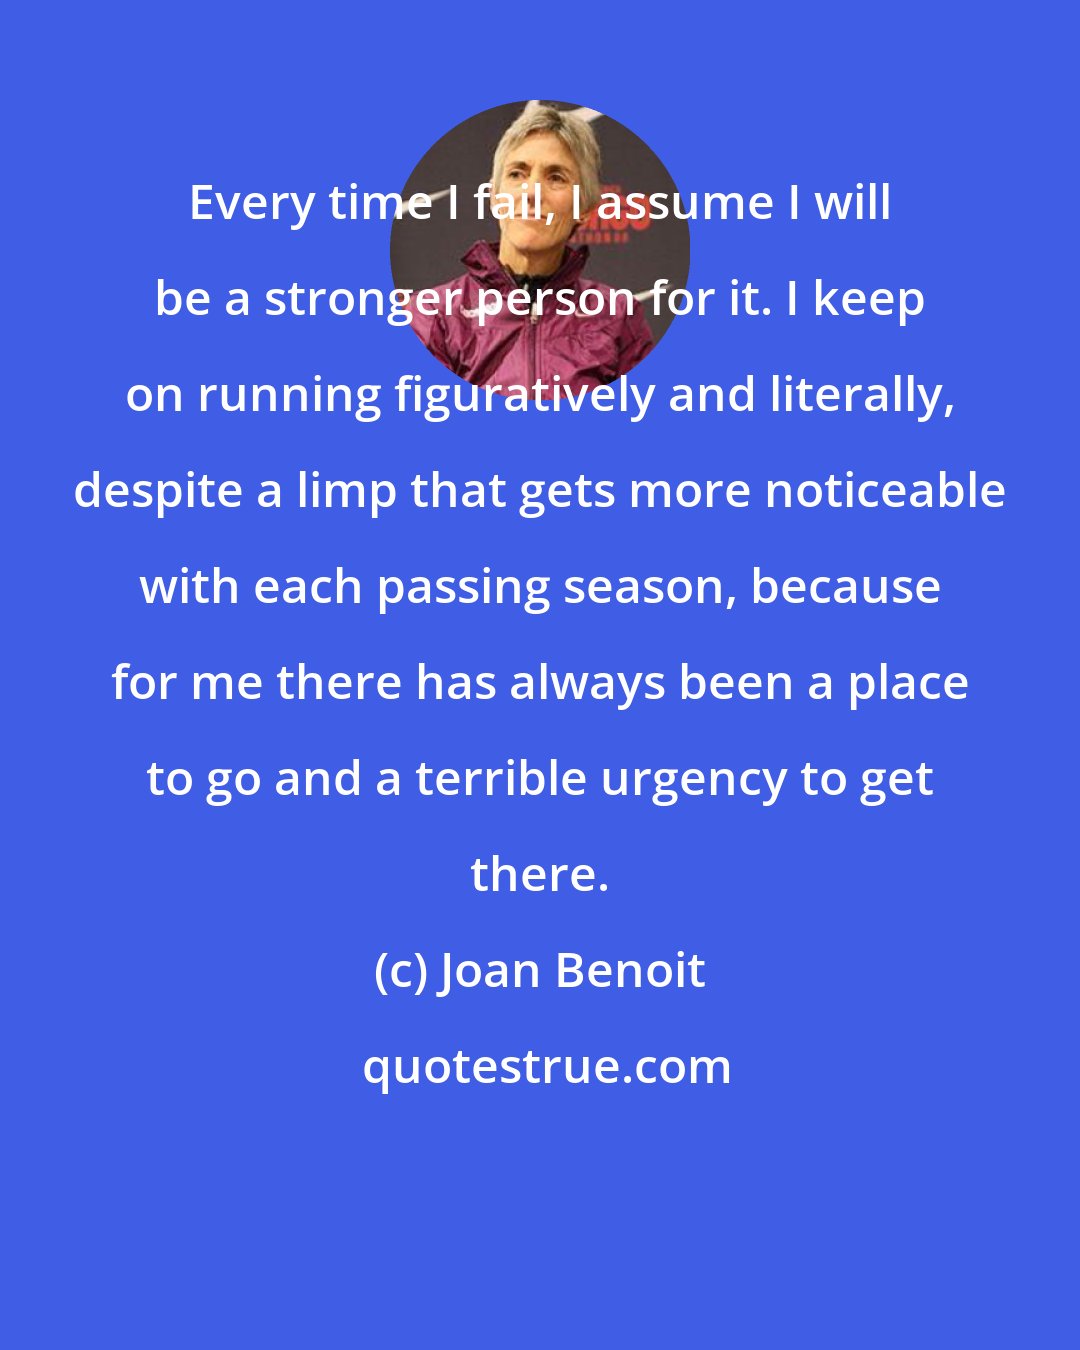 Joan Benoit: Every time I fail, I assume I will be a stronger person for it. I keep on running figuratively and literally, despite a limp that gets more noticeable with each passing season, because for me there has always been a place to go and a terrible urgency to get there.